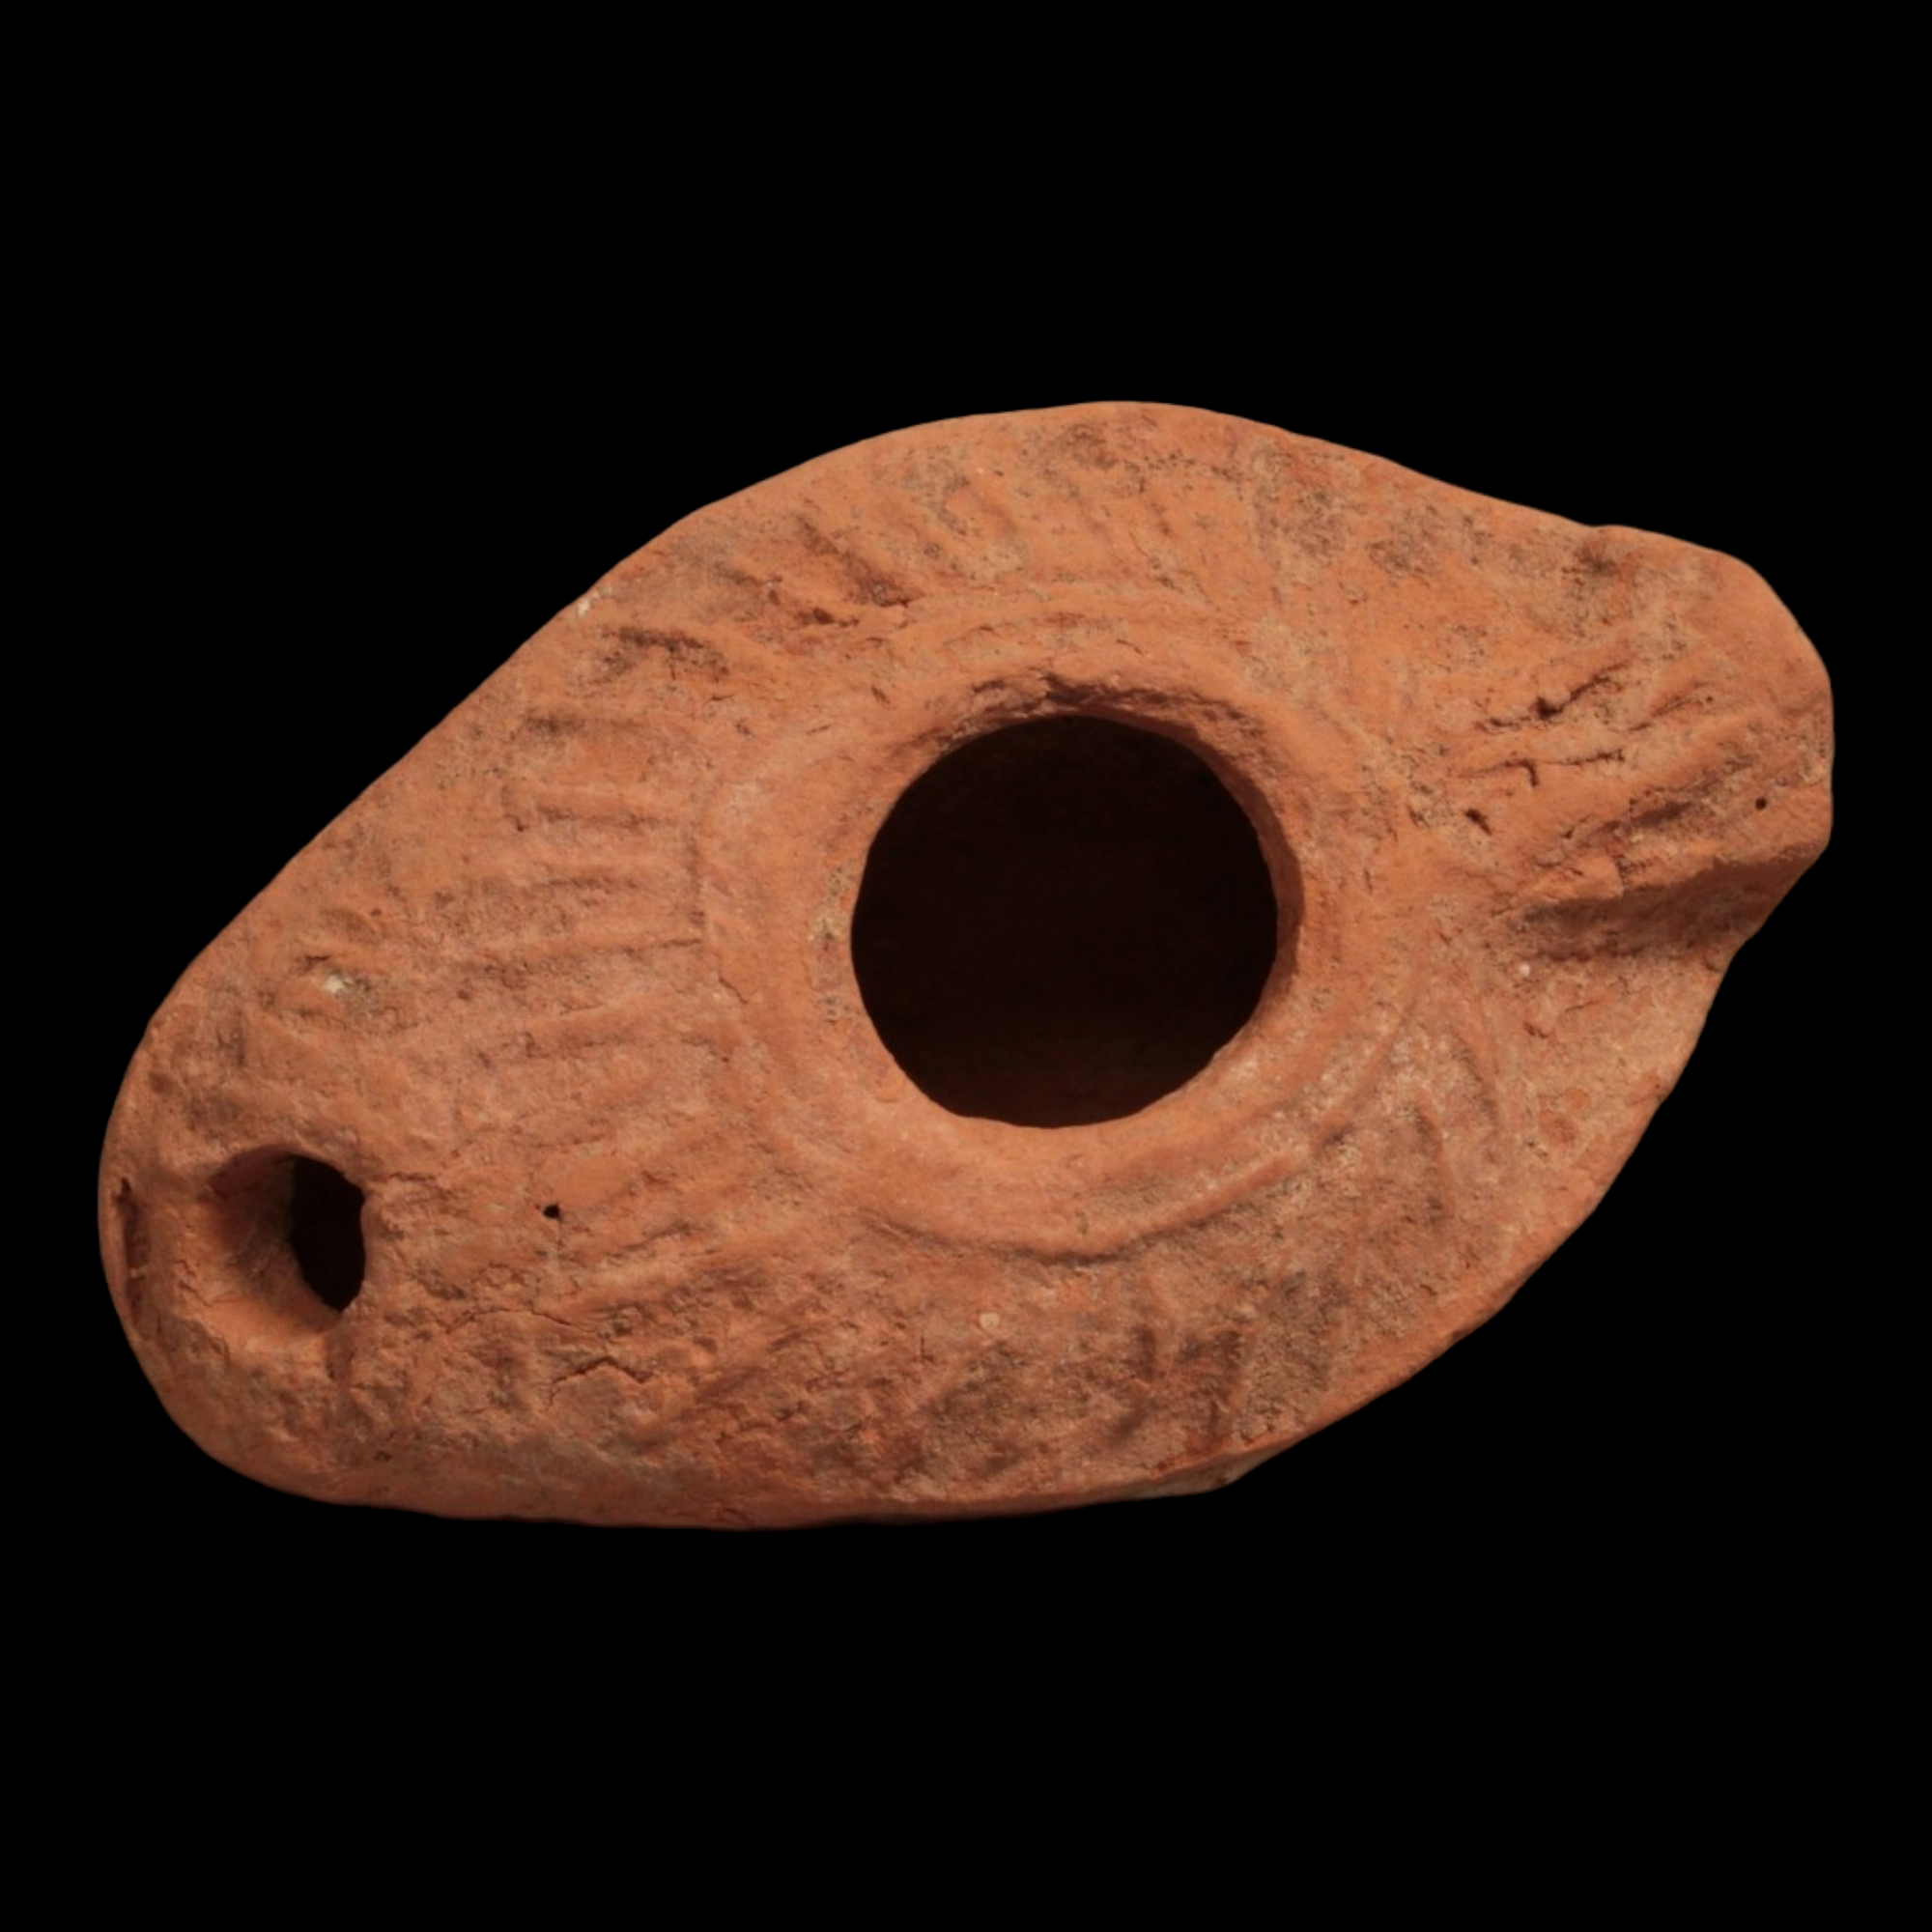 Byzantine Oil Lamp, 3.6 inch - c. 300 to 600 CE - Middle East